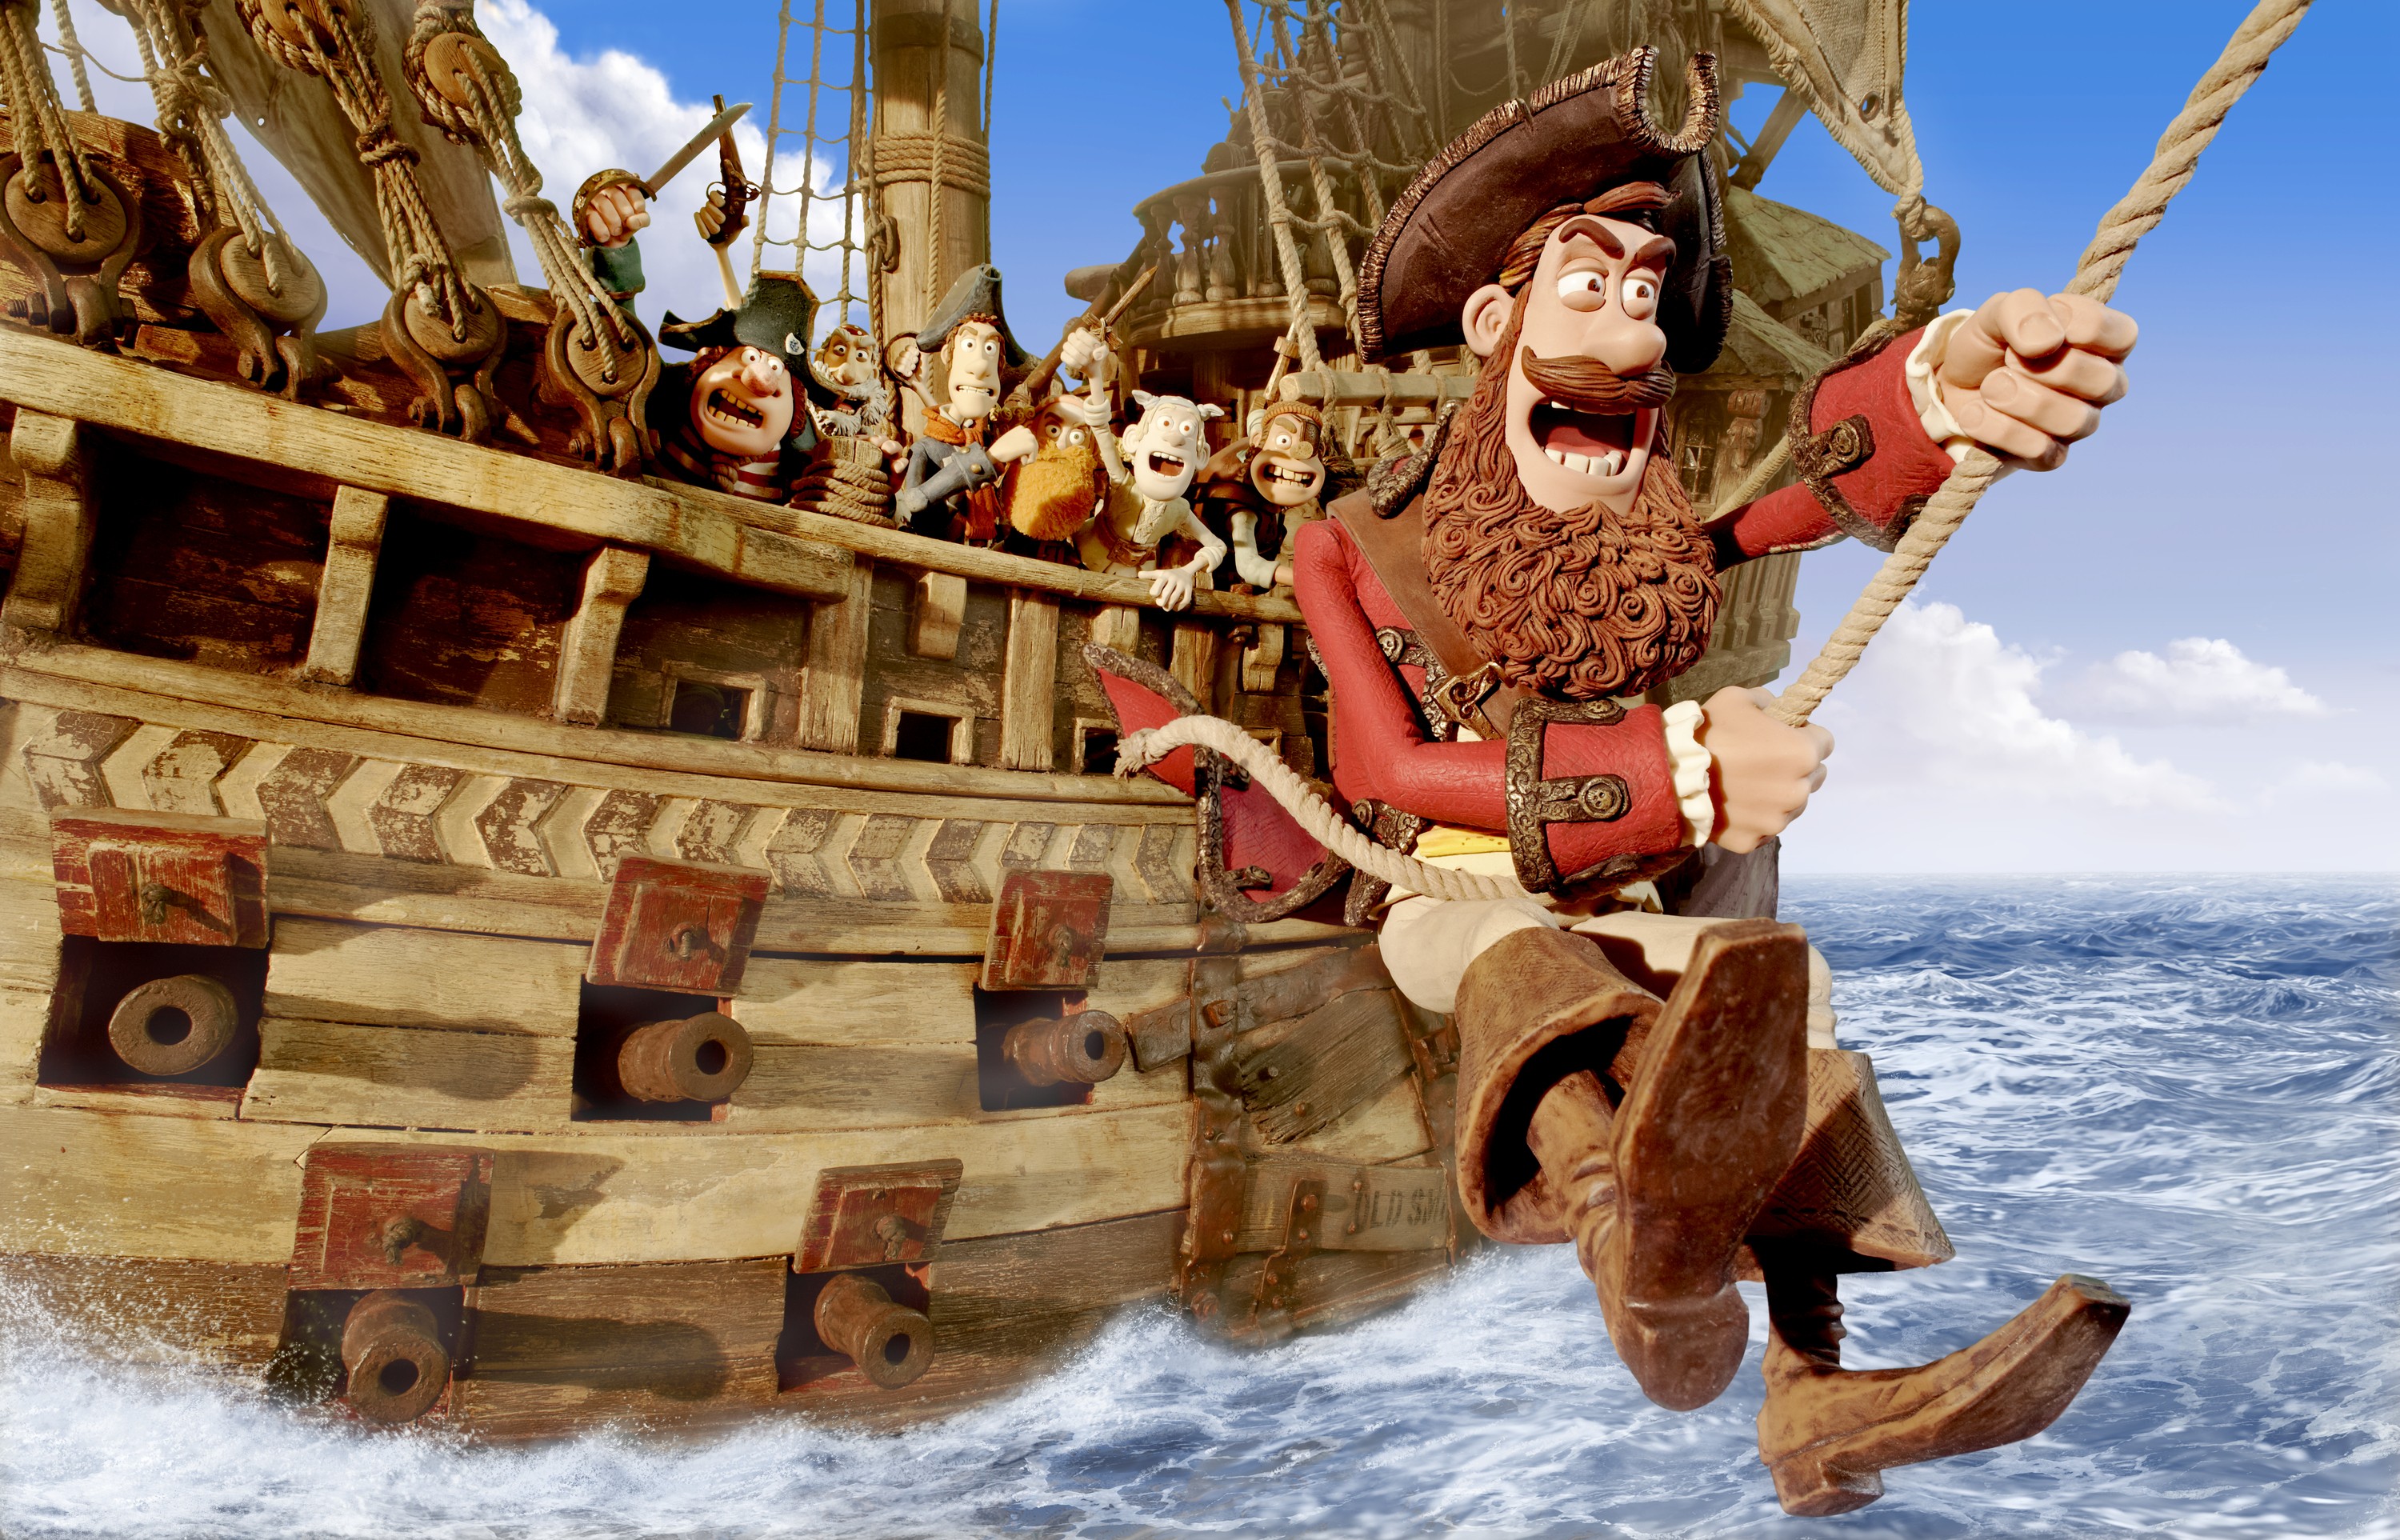 the, Pirates , Band, Of, Misfits, Animation, Adventure, Comedy, Cartoon, Pirate,  11 Wallpaper